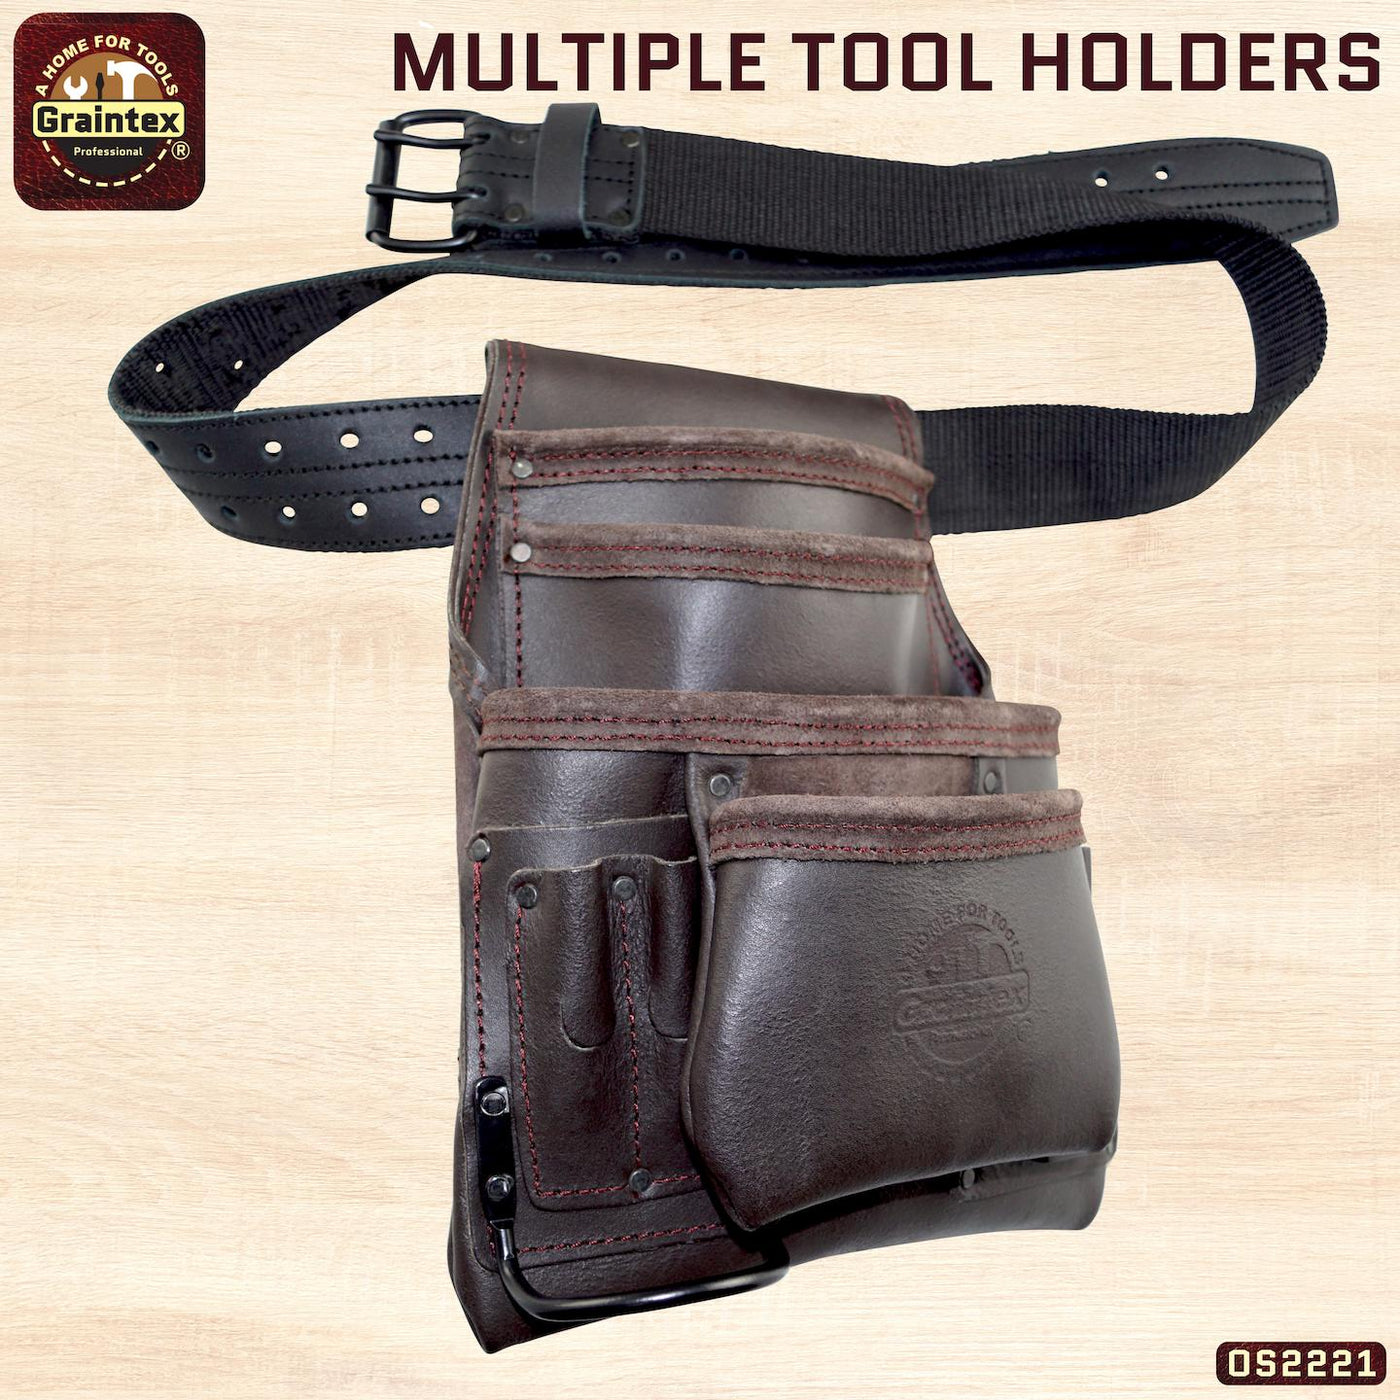 OS2221 :: 10 Pocket Nail & Tool Pouch Oil Tanned Leather with 2" Belt